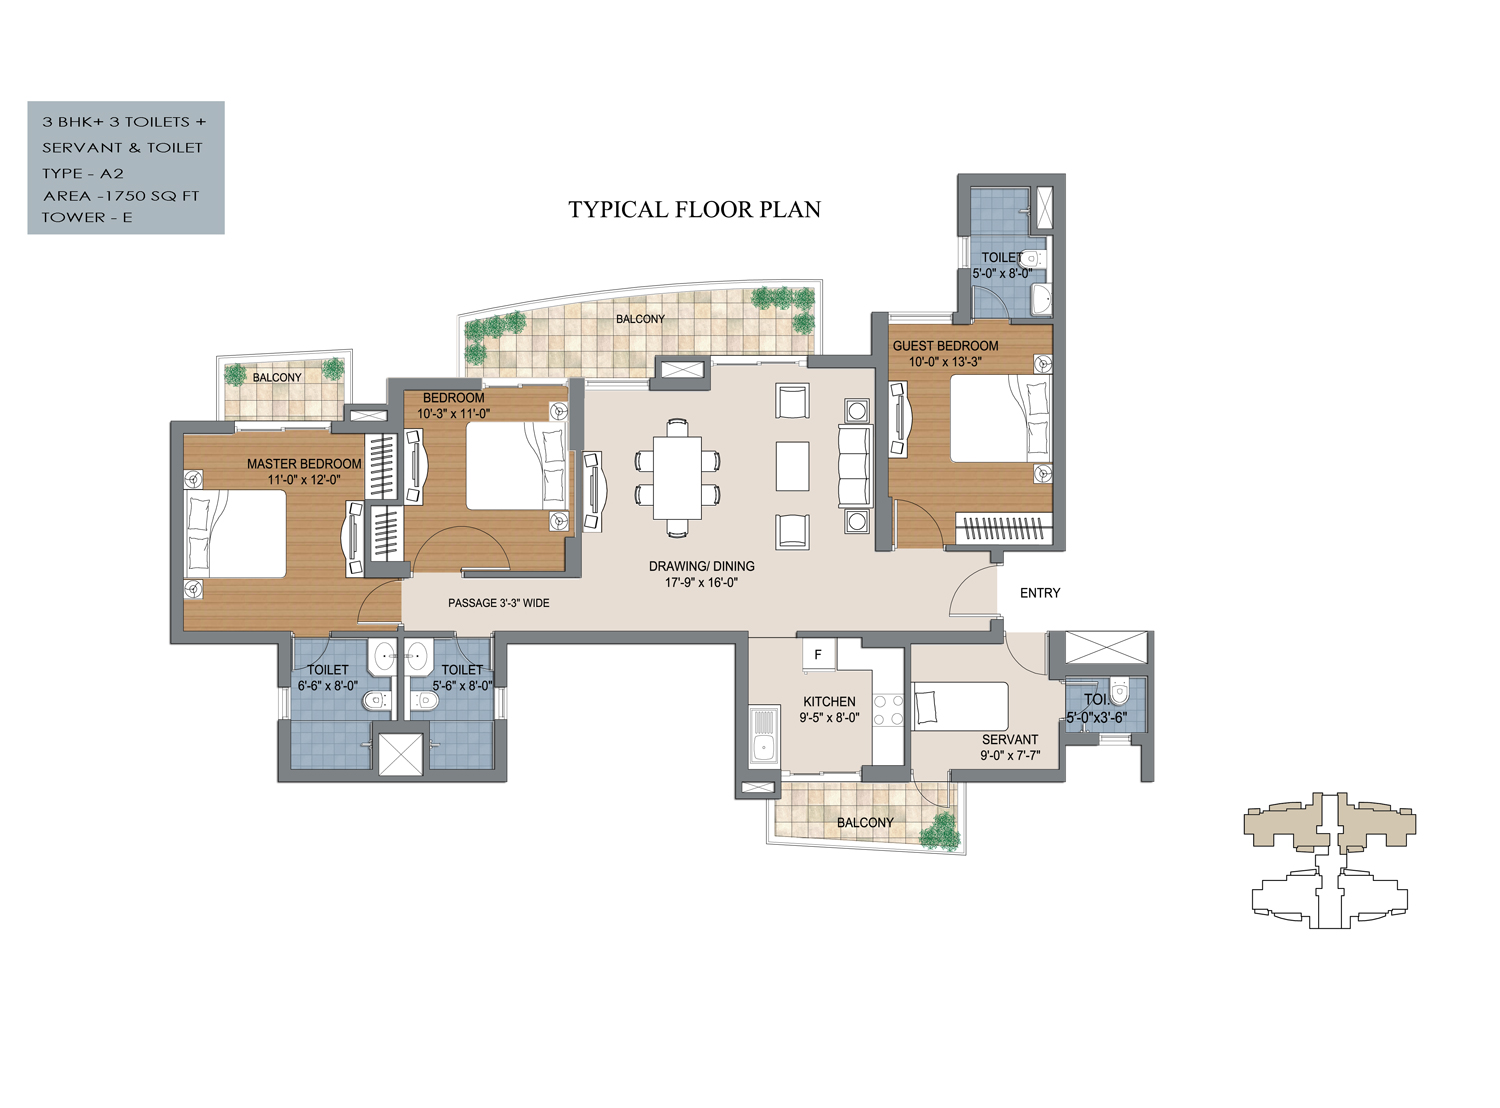 3 bhk floor plan of bptp the resort with 1875 sq feet